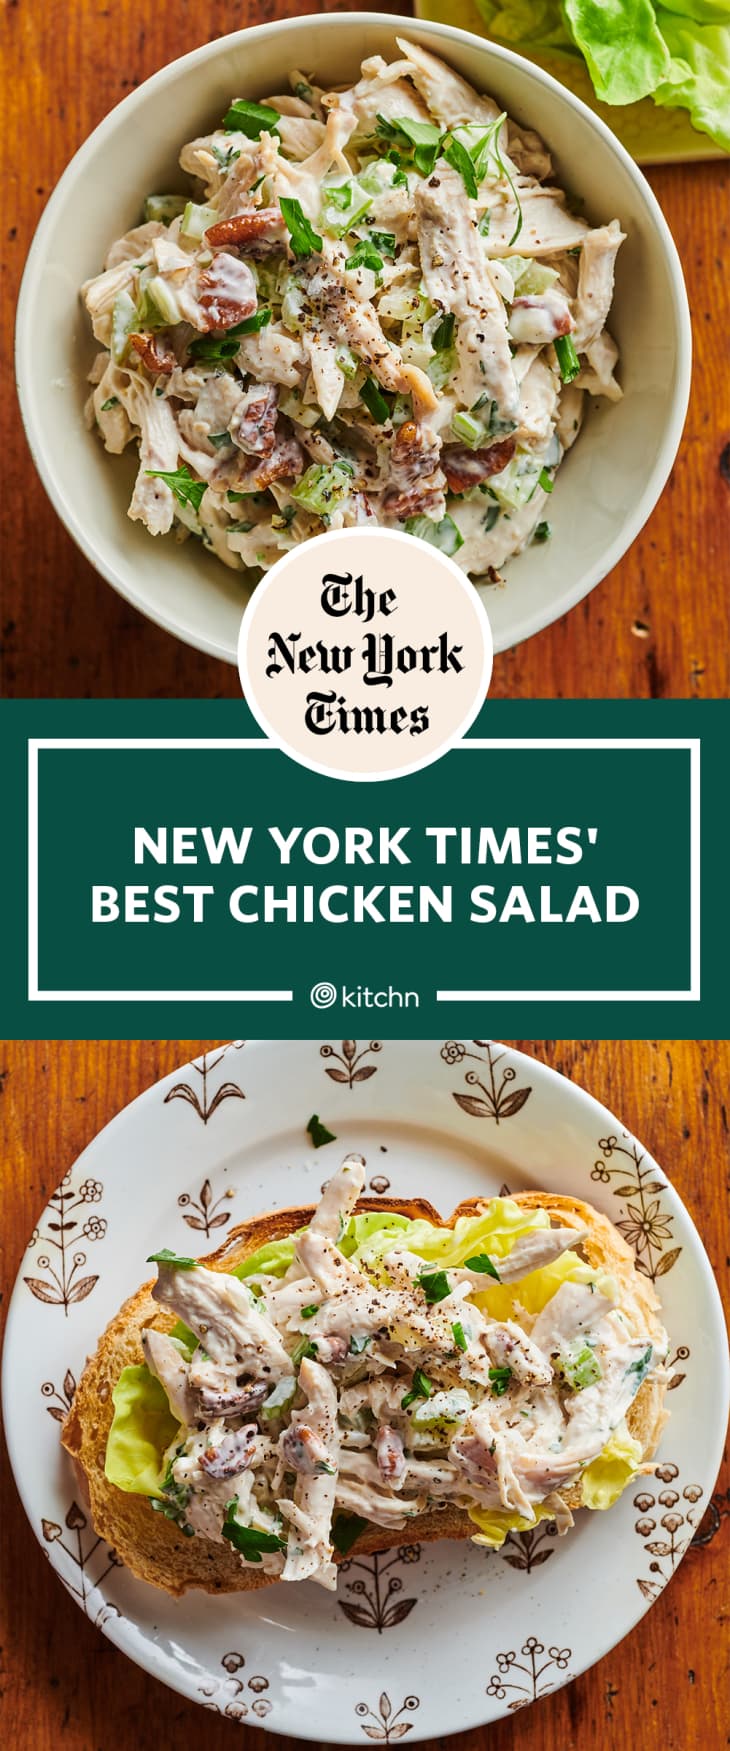 I Tried The New York Times' Best Chicken Salad Recipe | Kitchn